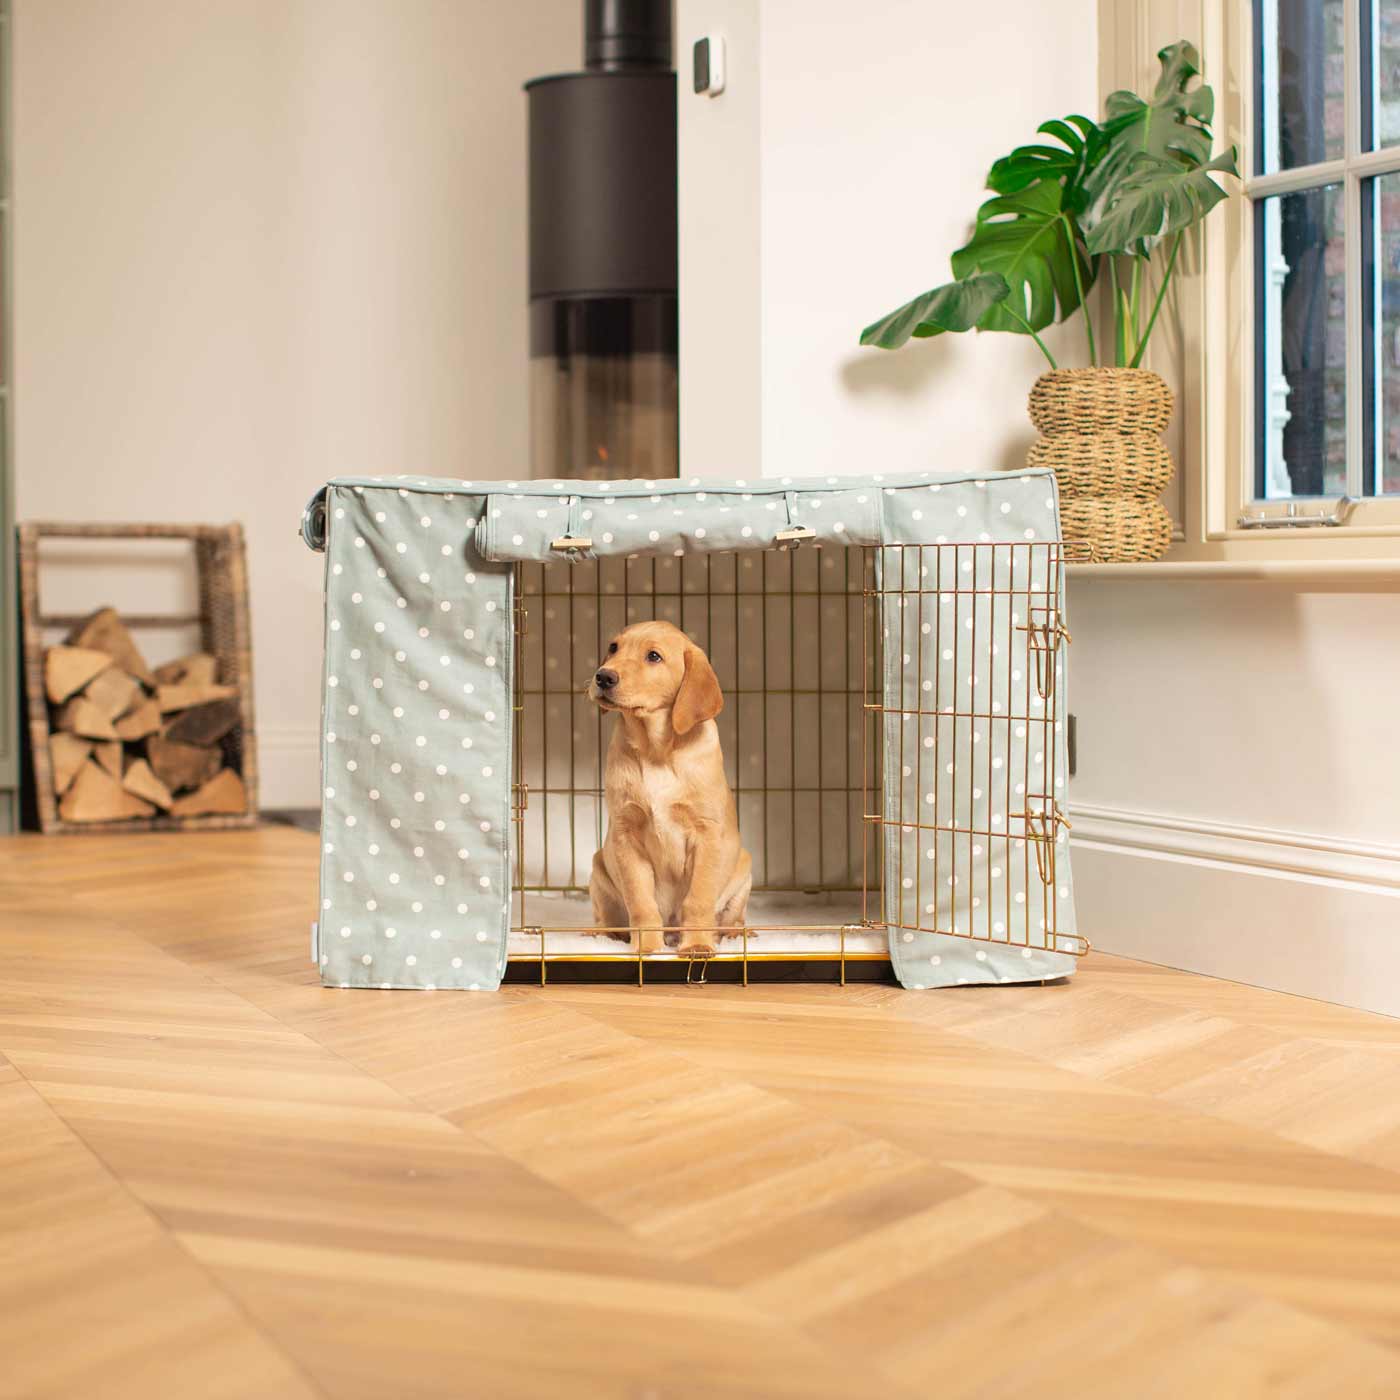 Luxury Gold Dog Cage Set With Crate Cover, The Perfect Dog Crate For The Ultimate Naptime, Available Now at Lords & Labradors US